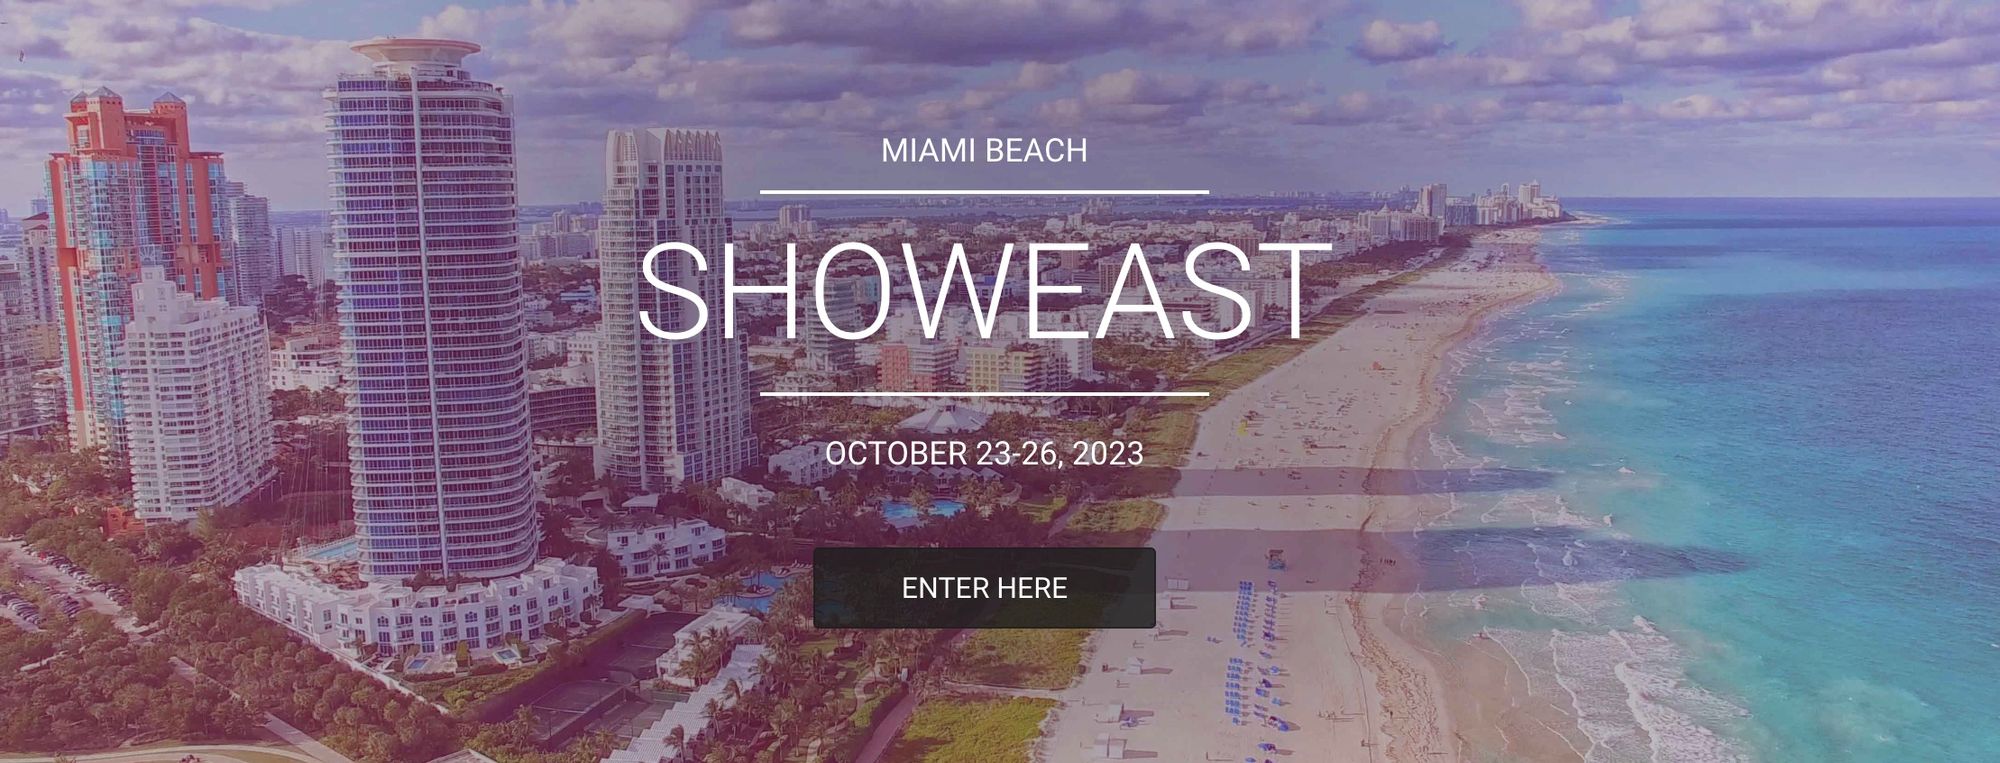 Angel Studios Makes Appearance at ShowEast, the Annual Exhibition Industry Convention in Miami